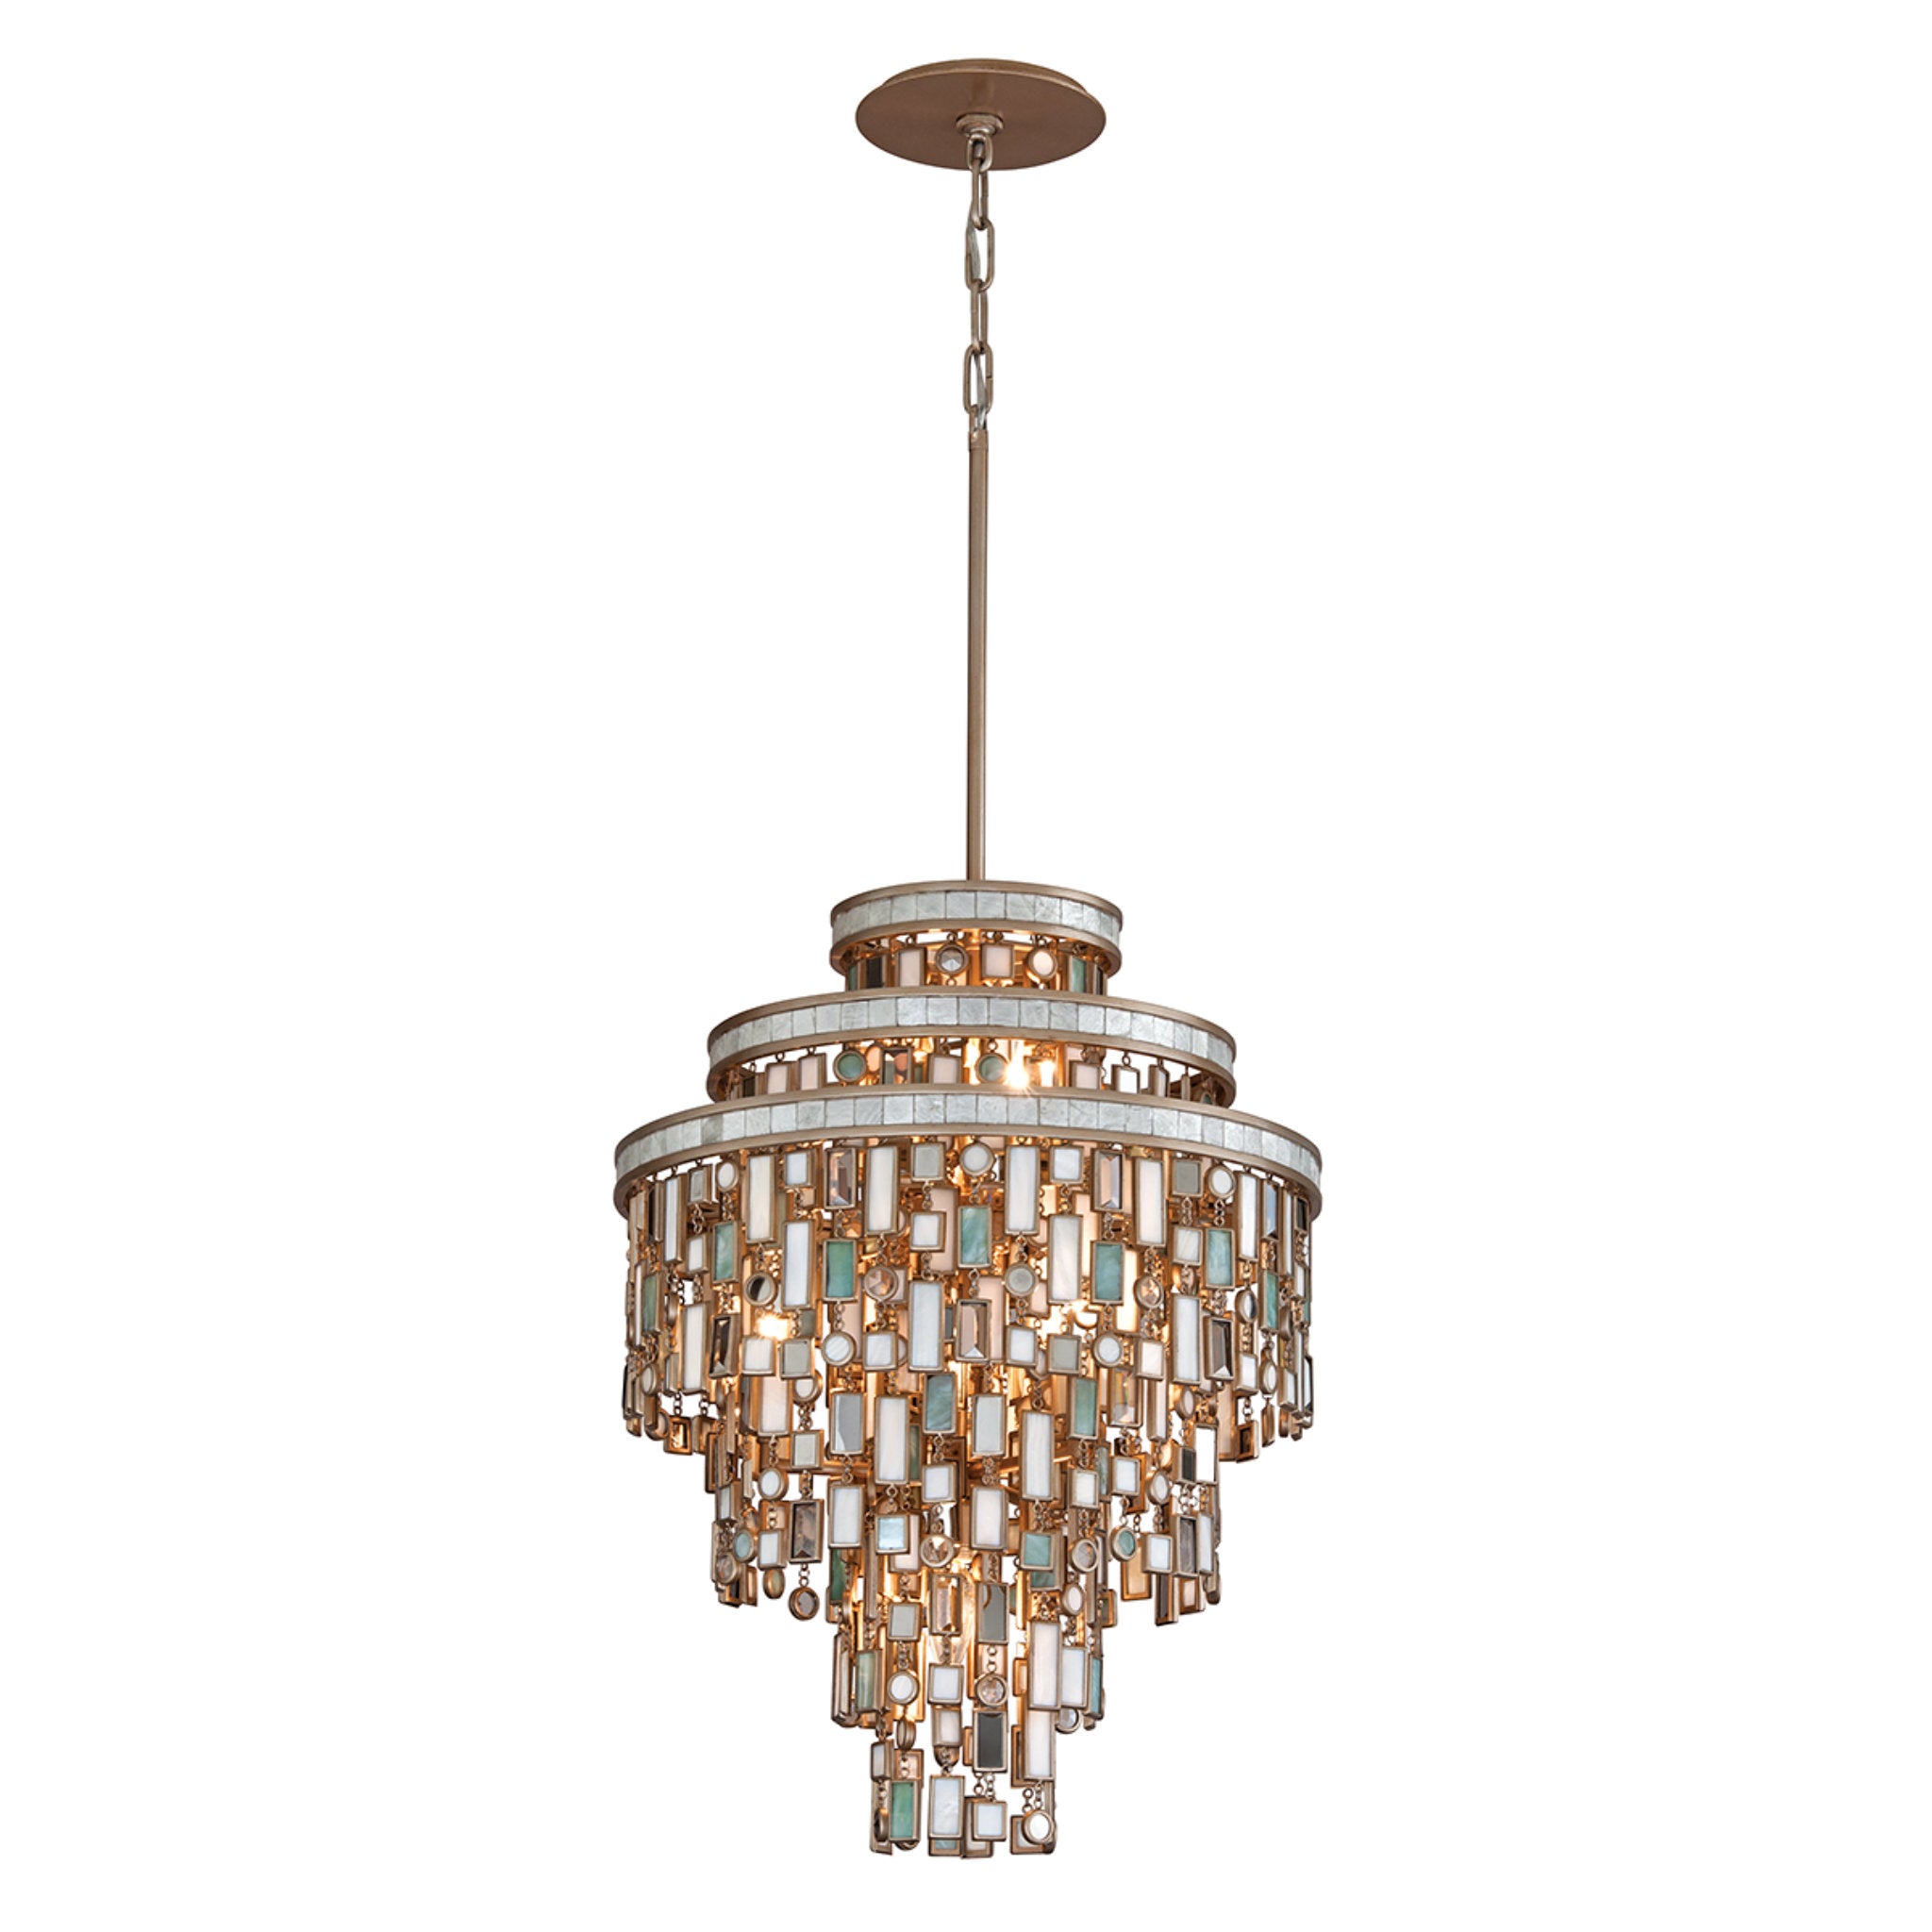 Dolcetti 7 Light Chandelier in Champagne Leaf